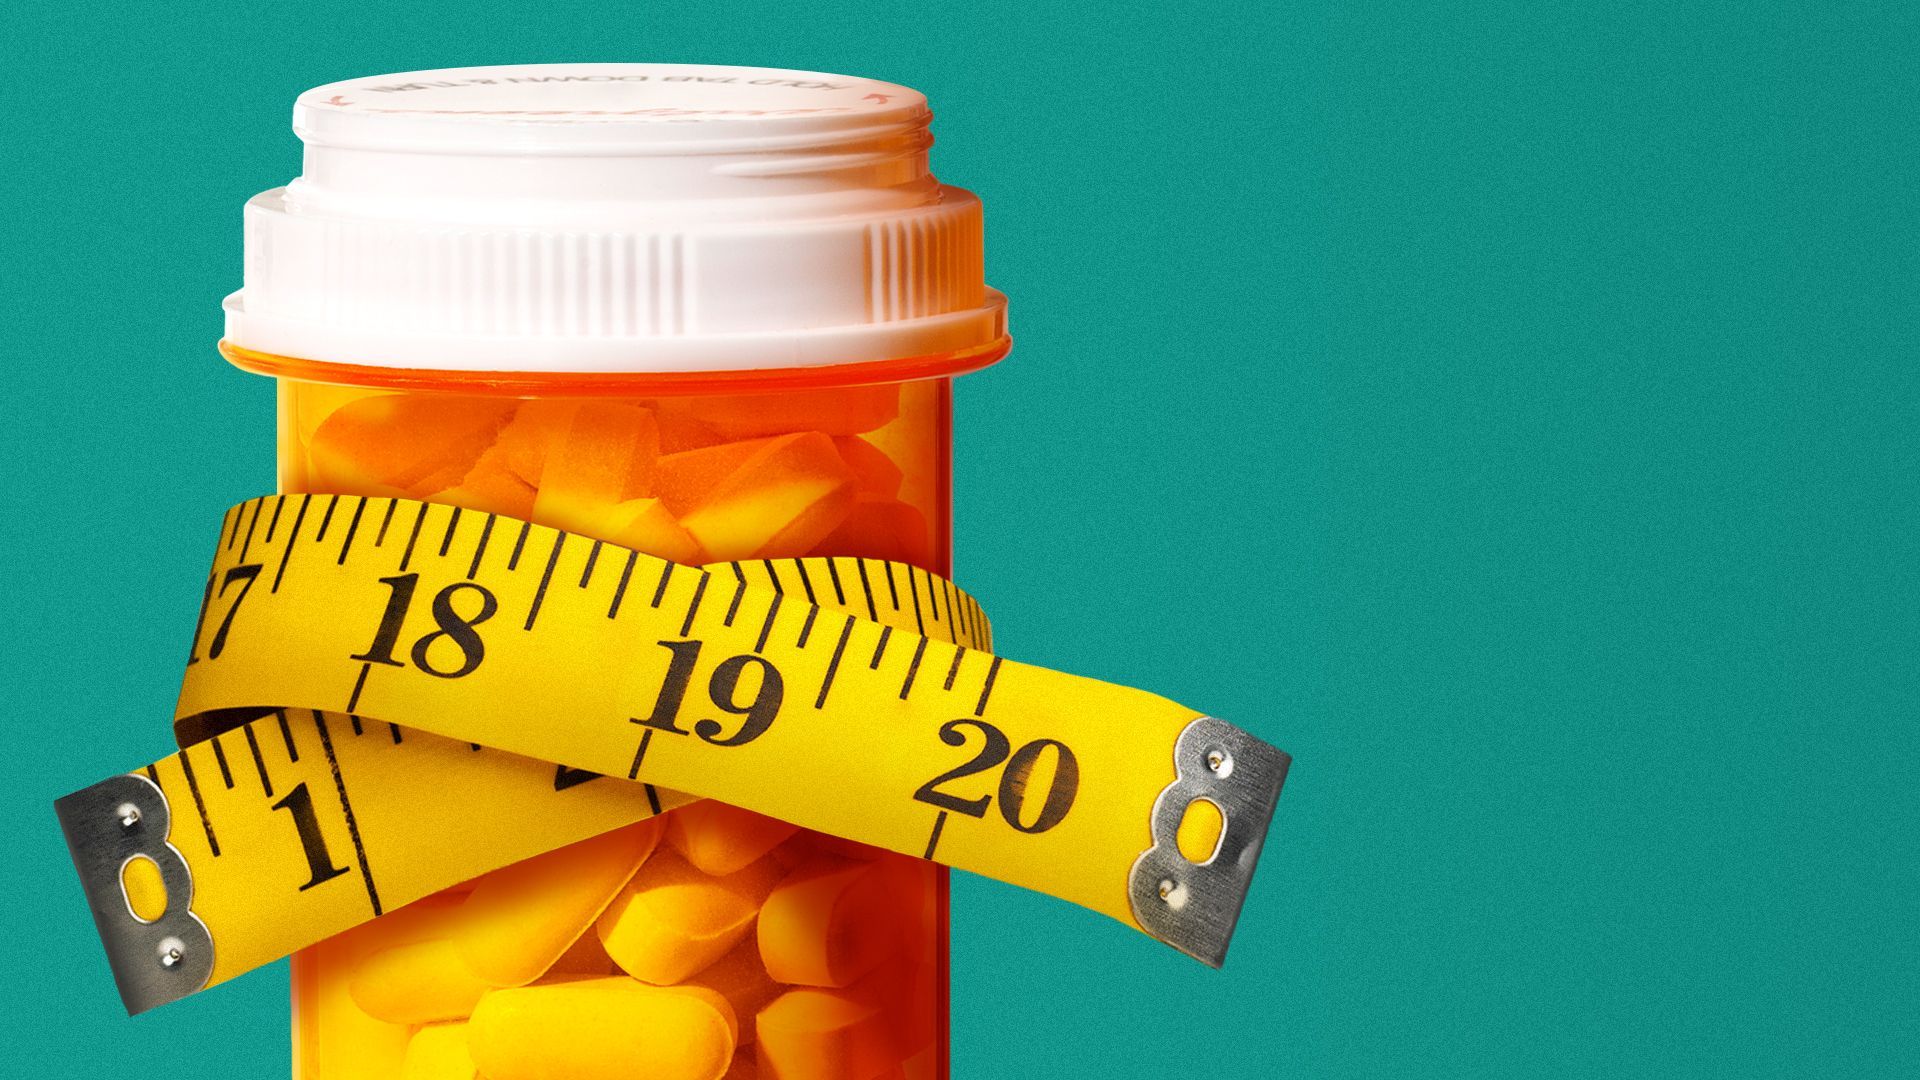 Illustration of a measuring tape around a pill bottle.